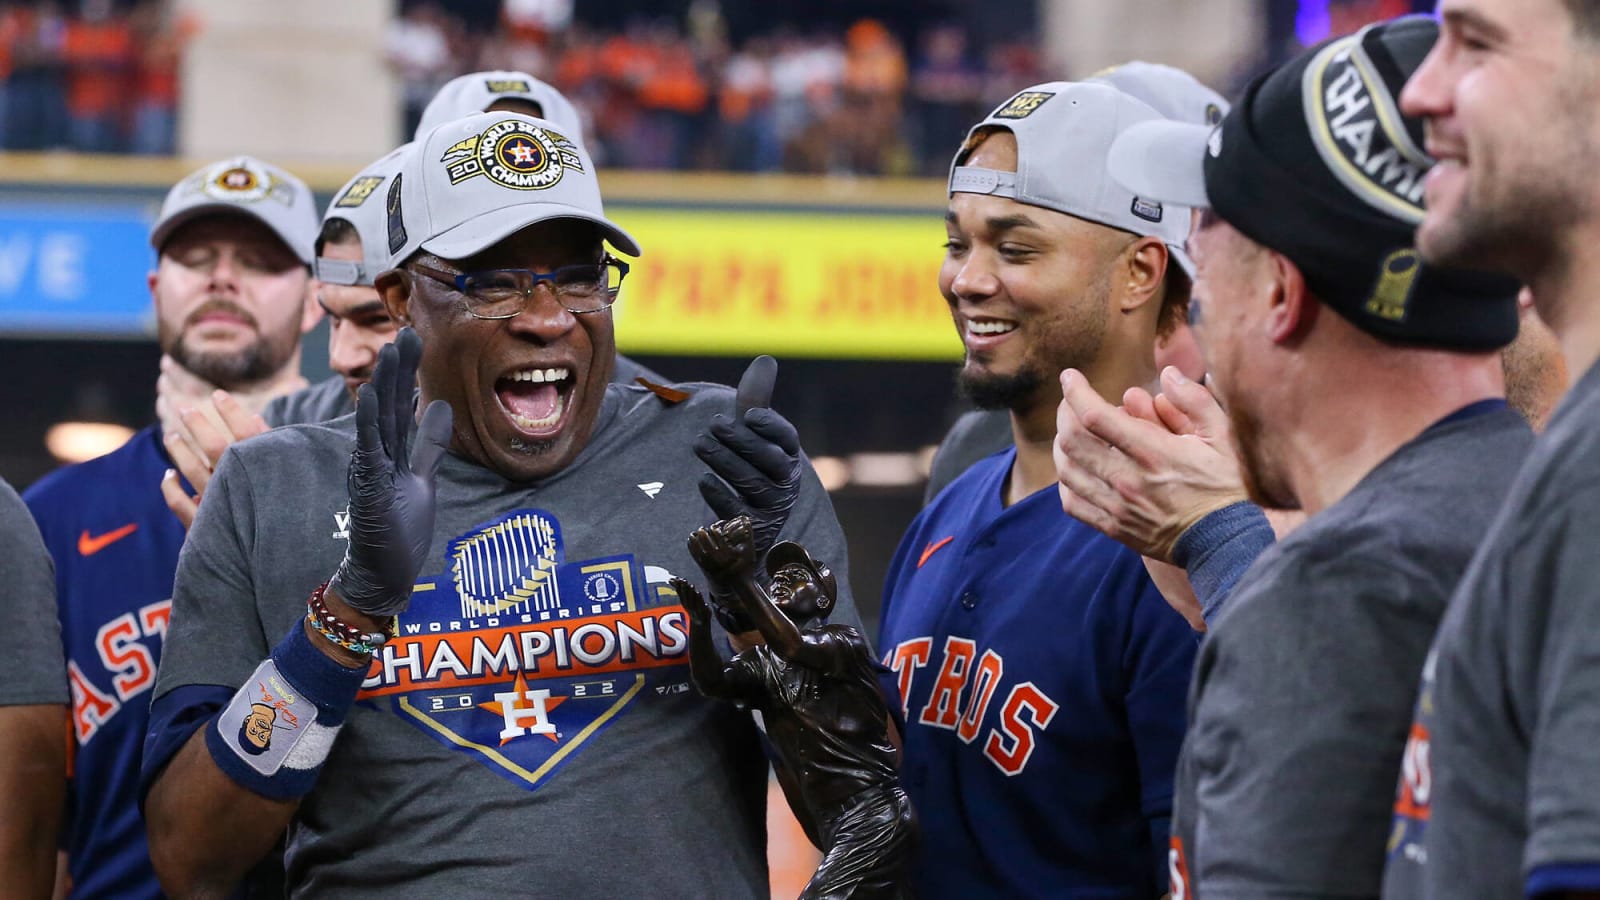 The Baseball World Celebrates Dusty Baker's First Title as Manager